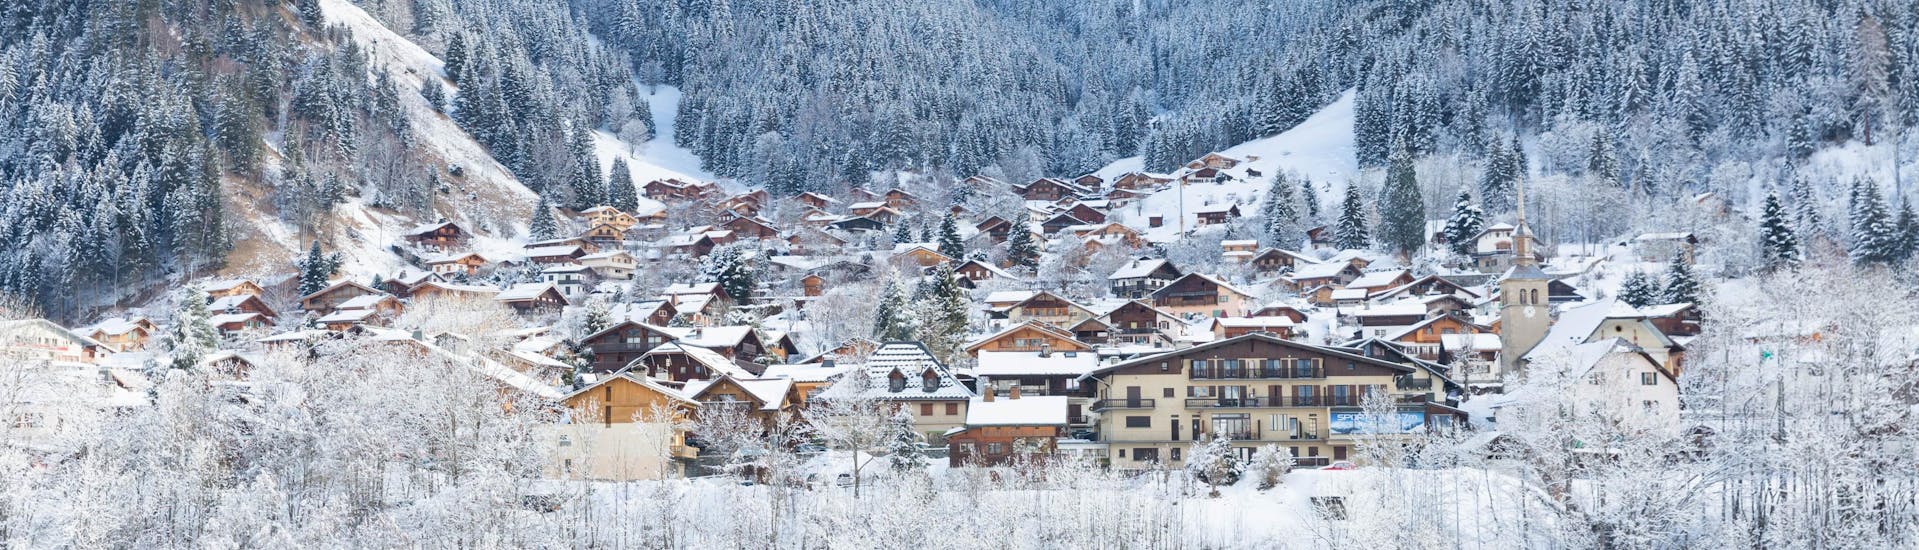 Landscape of the winter village of Les Contamines where ski schools are located and offer their ski lessons.